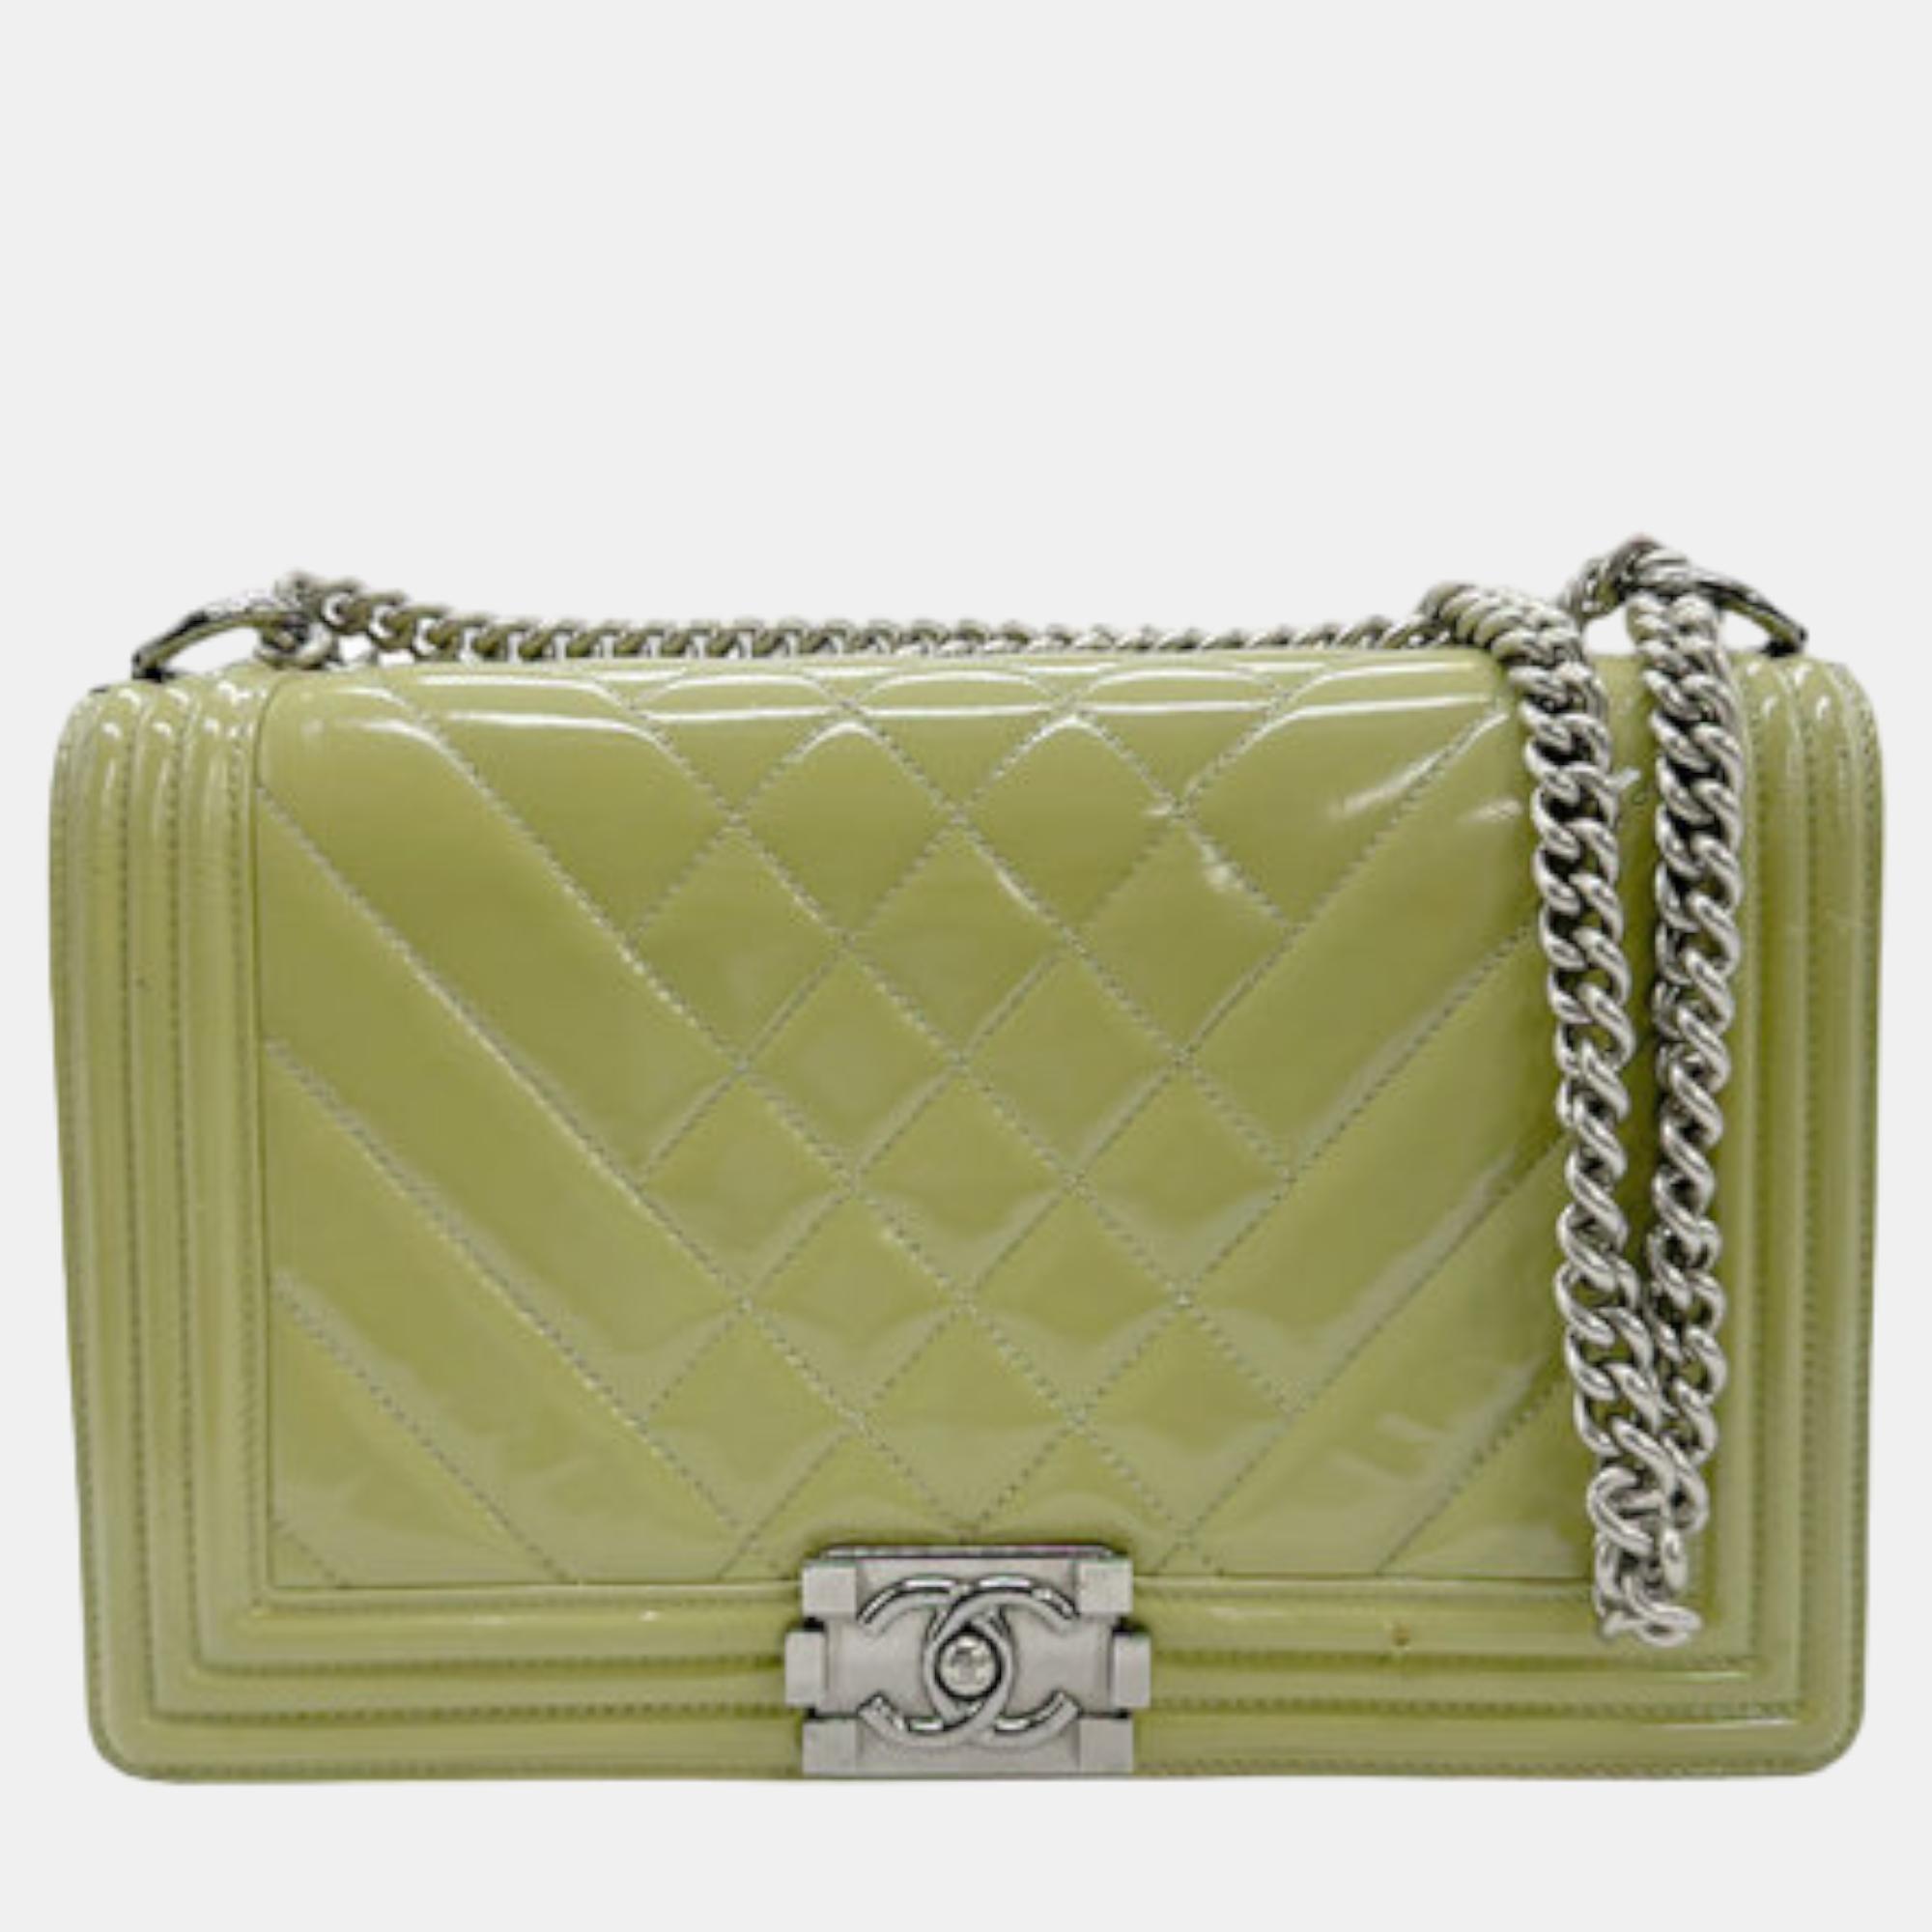 Chanel green patent leather large boy shoulder bags